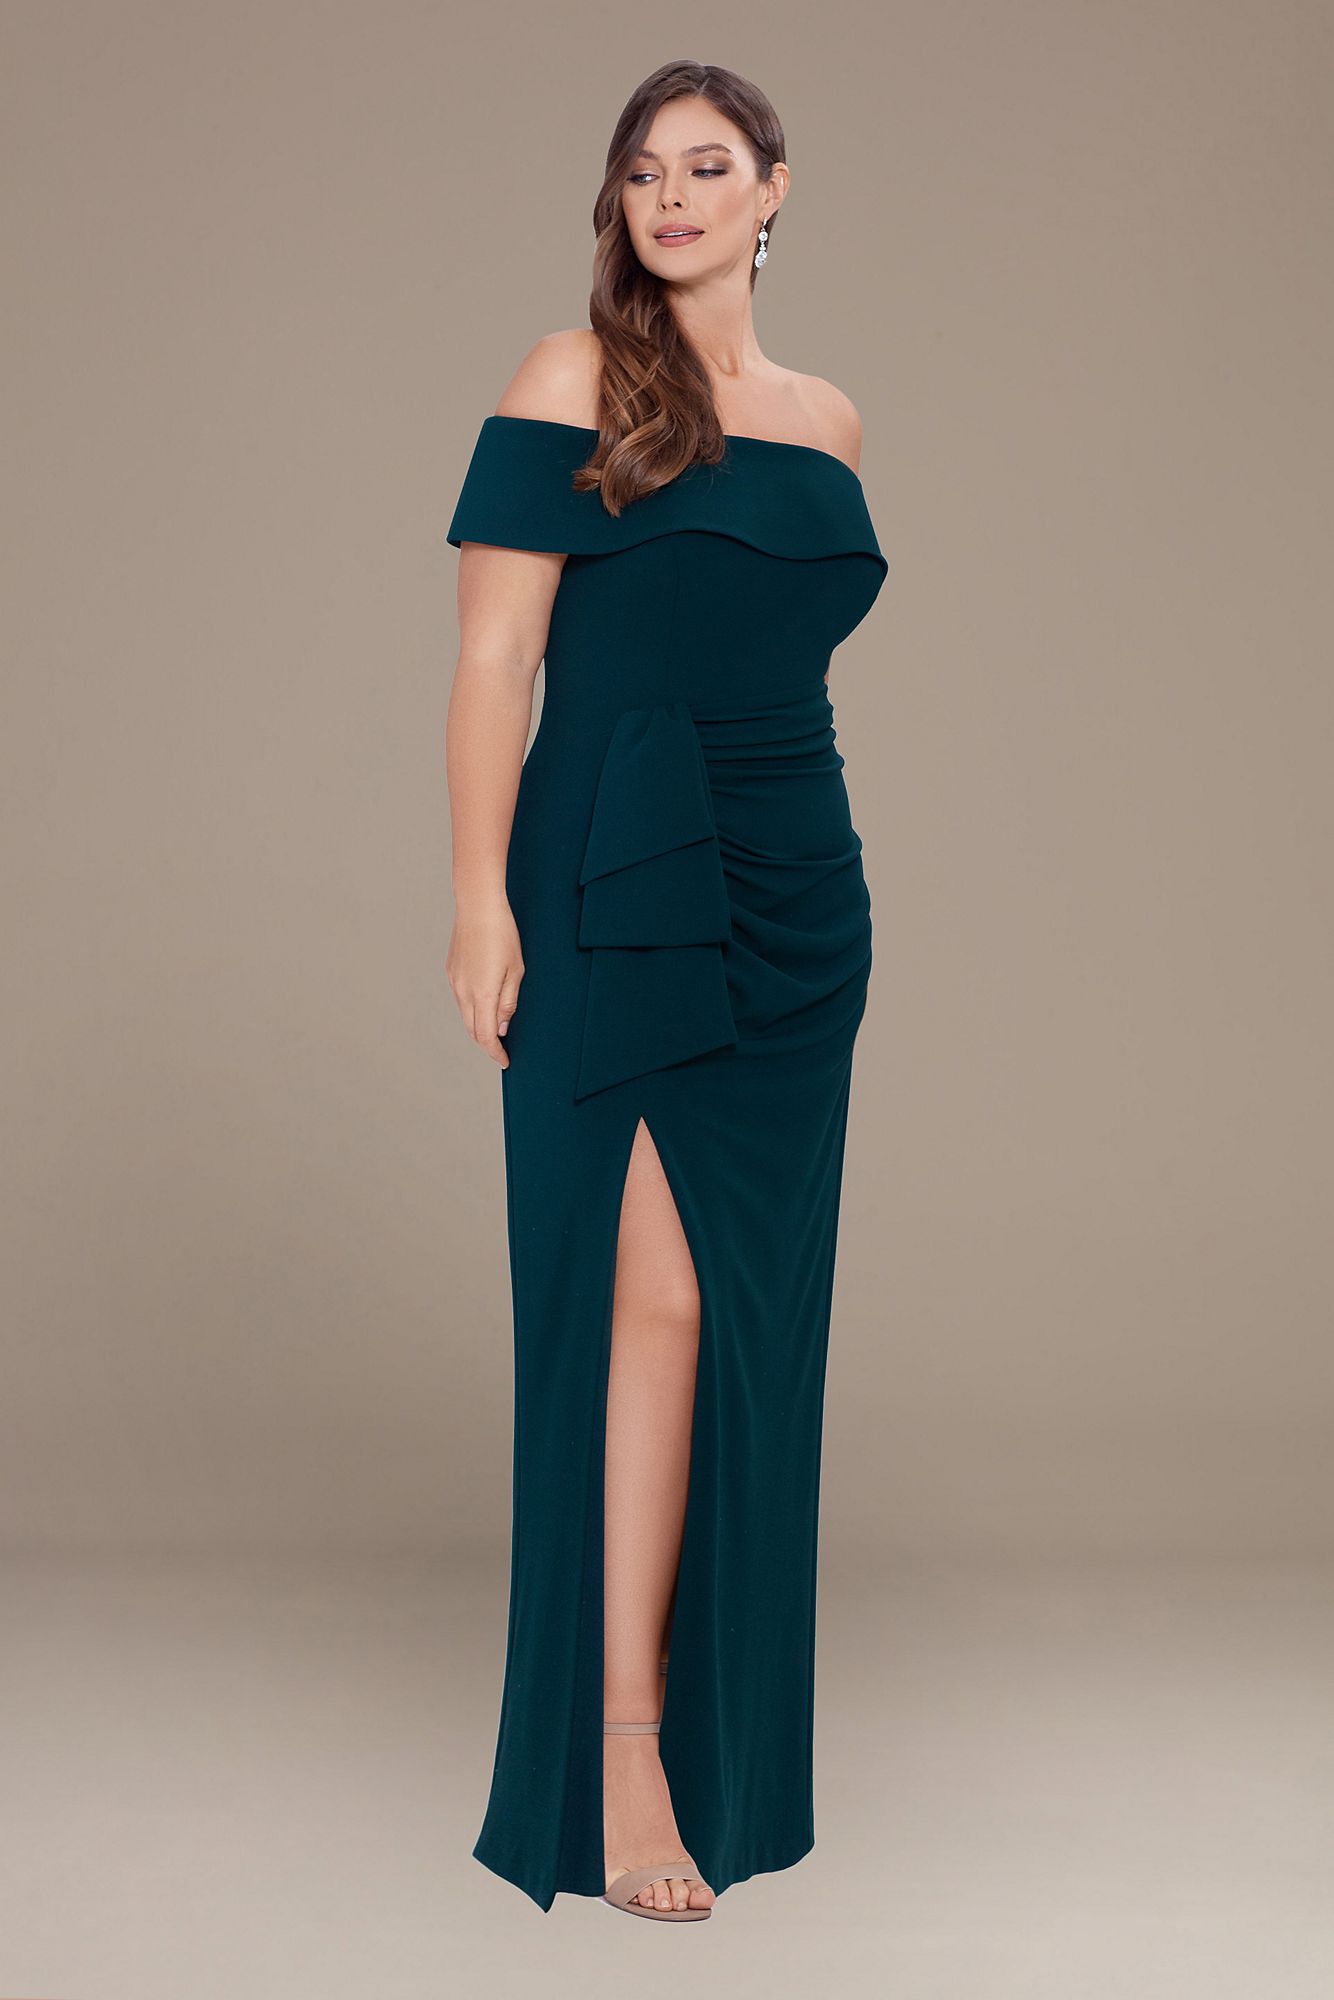 Plus Size Crepe Off the Shoulder Dress with Ruffle Xscape 3760XW